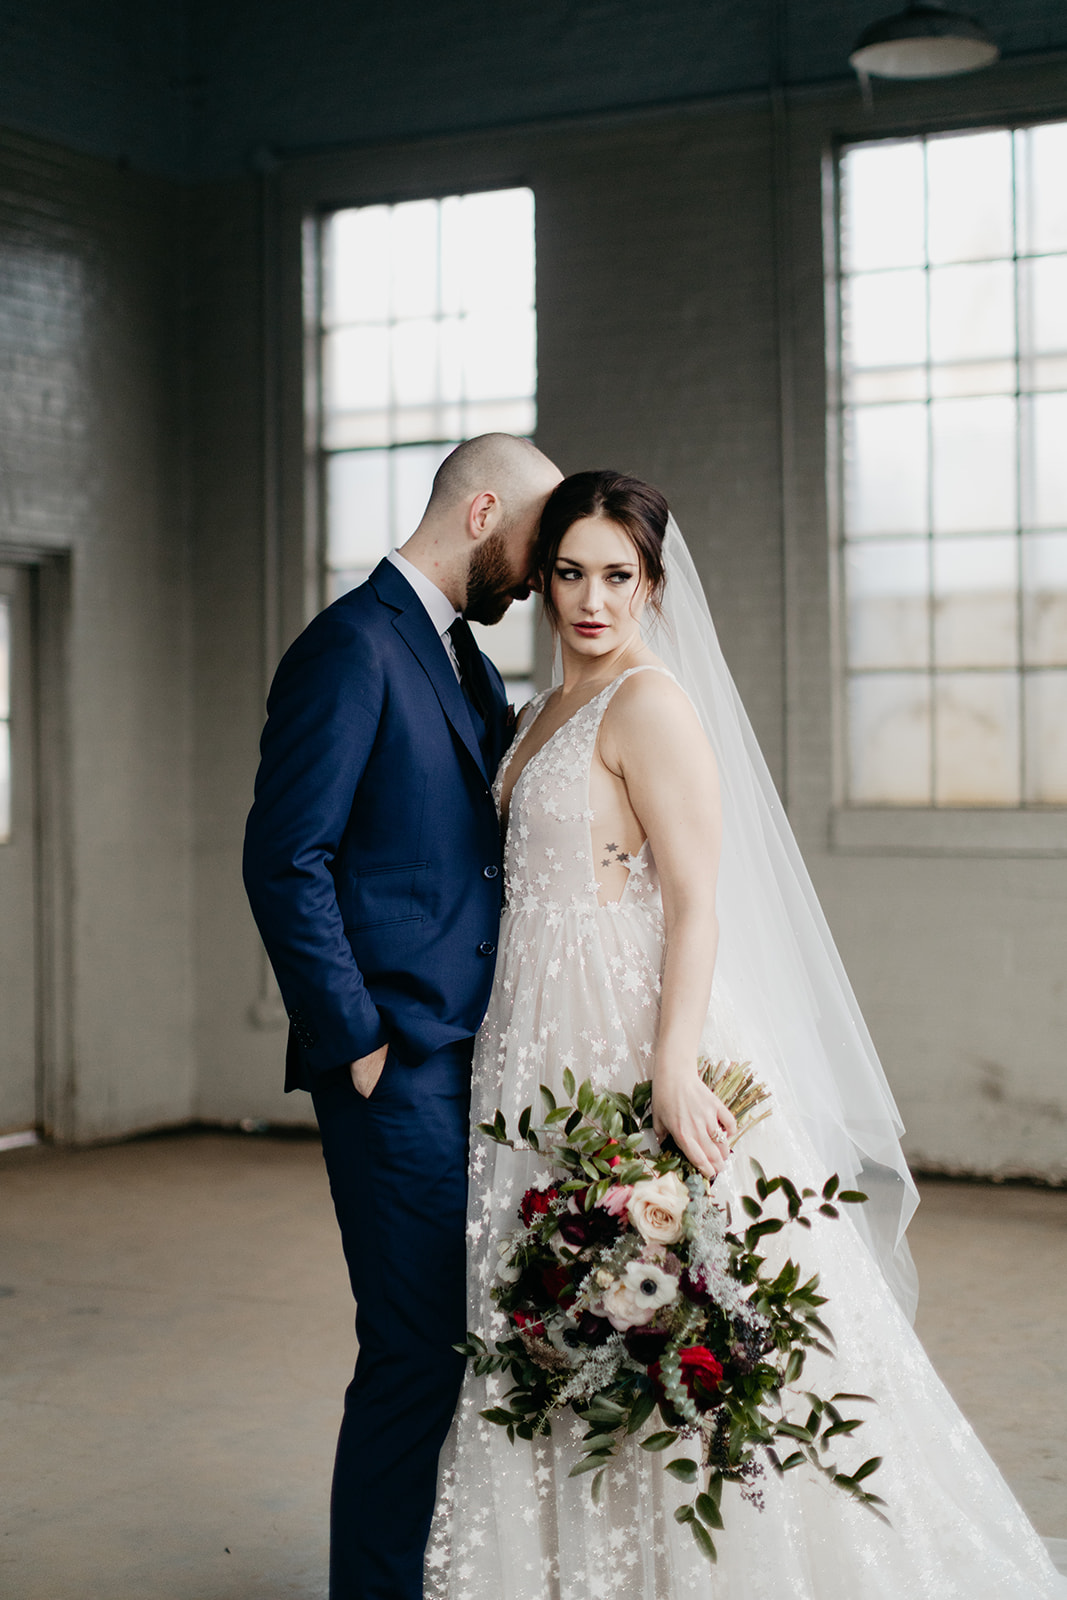 Starry wedding dress with an untamed, airy bridal bouquet with garden roses, ranunculus, and anemones in hues of burgundy and jewel tones. Wedding Floral Designer in Nashville, TN.